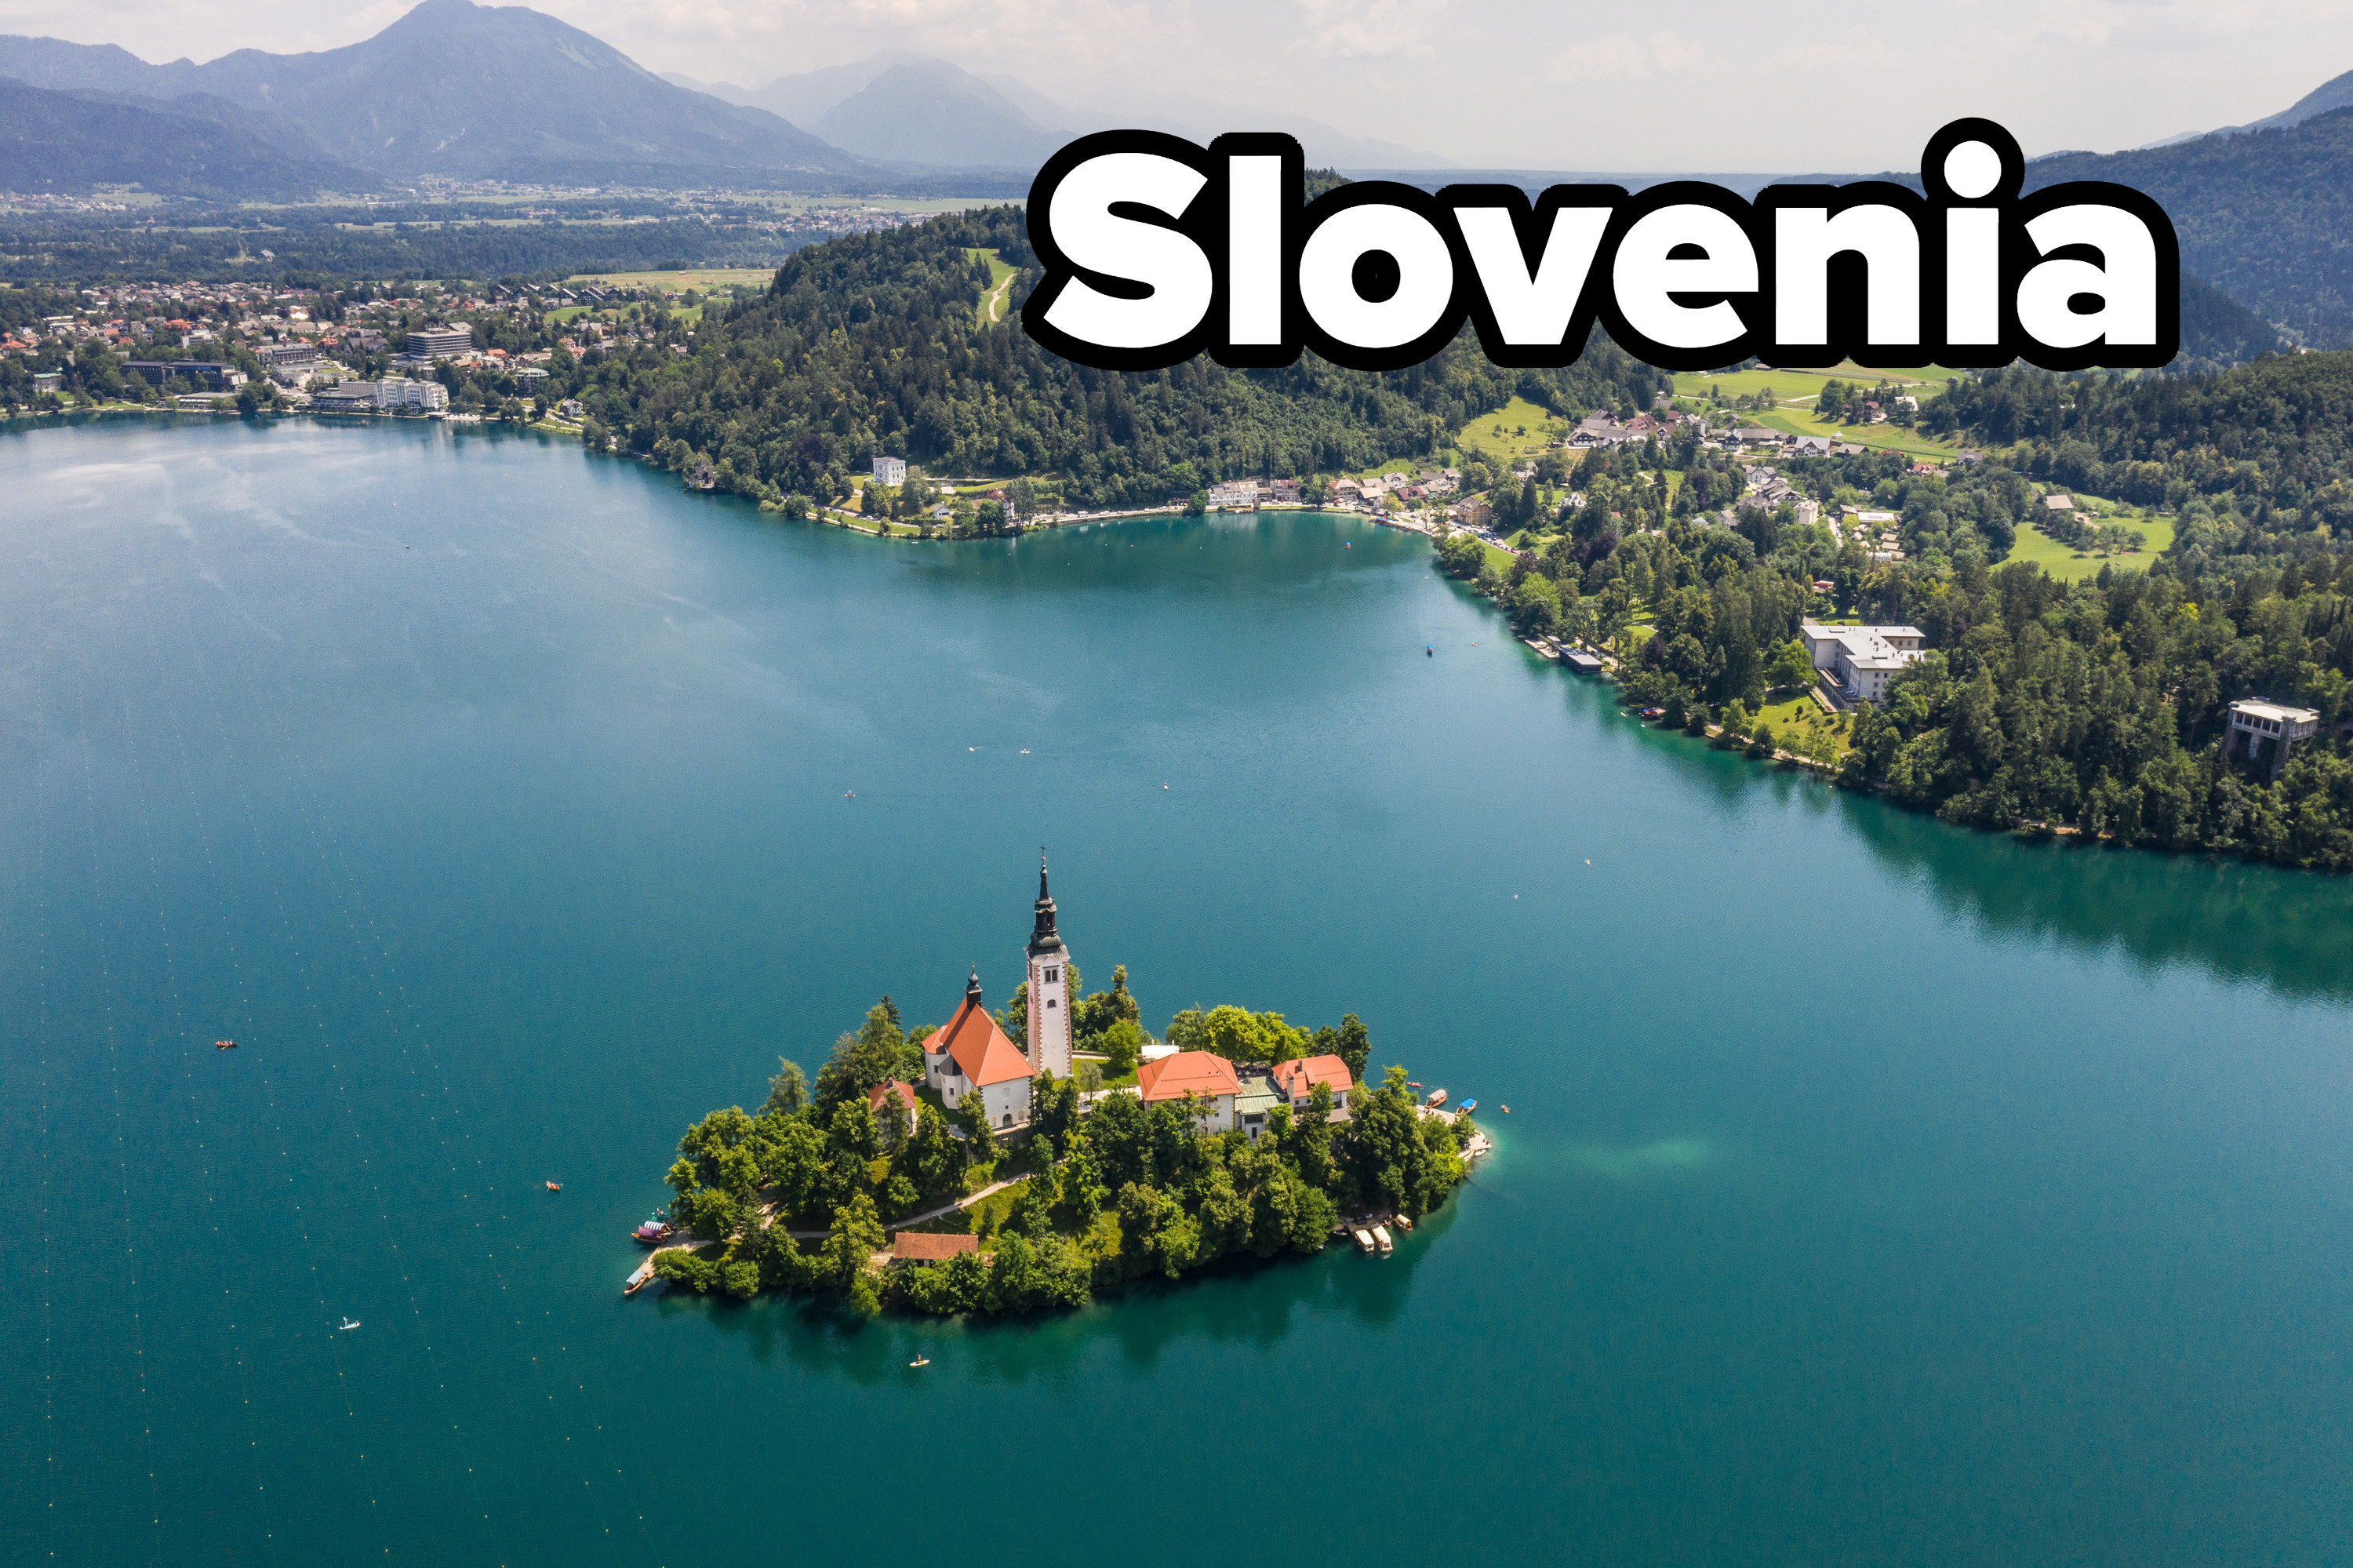 Lake Bled in Slovenia with small island in the center of the lake that has a church on it, with mountains in the background